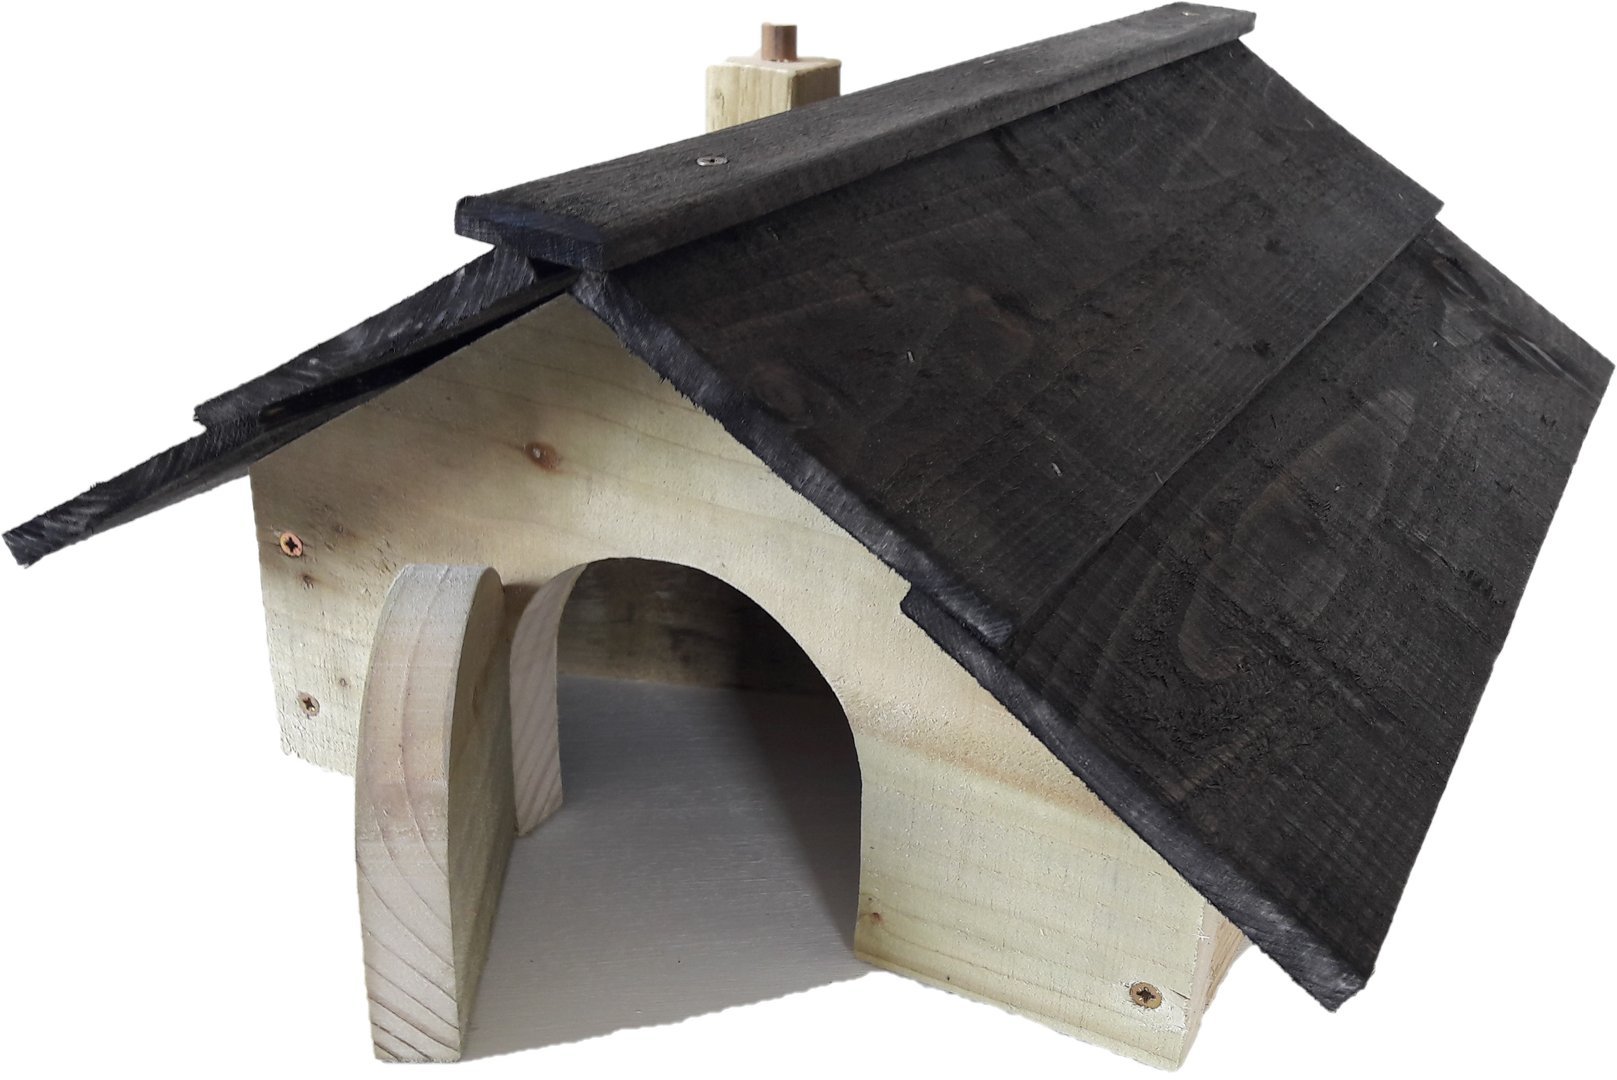 MADE IN THE UK HEDGEHOG HOUSE WITH BLACK TIMBER ROOF INCORPORATING ROOM DIVIDE 